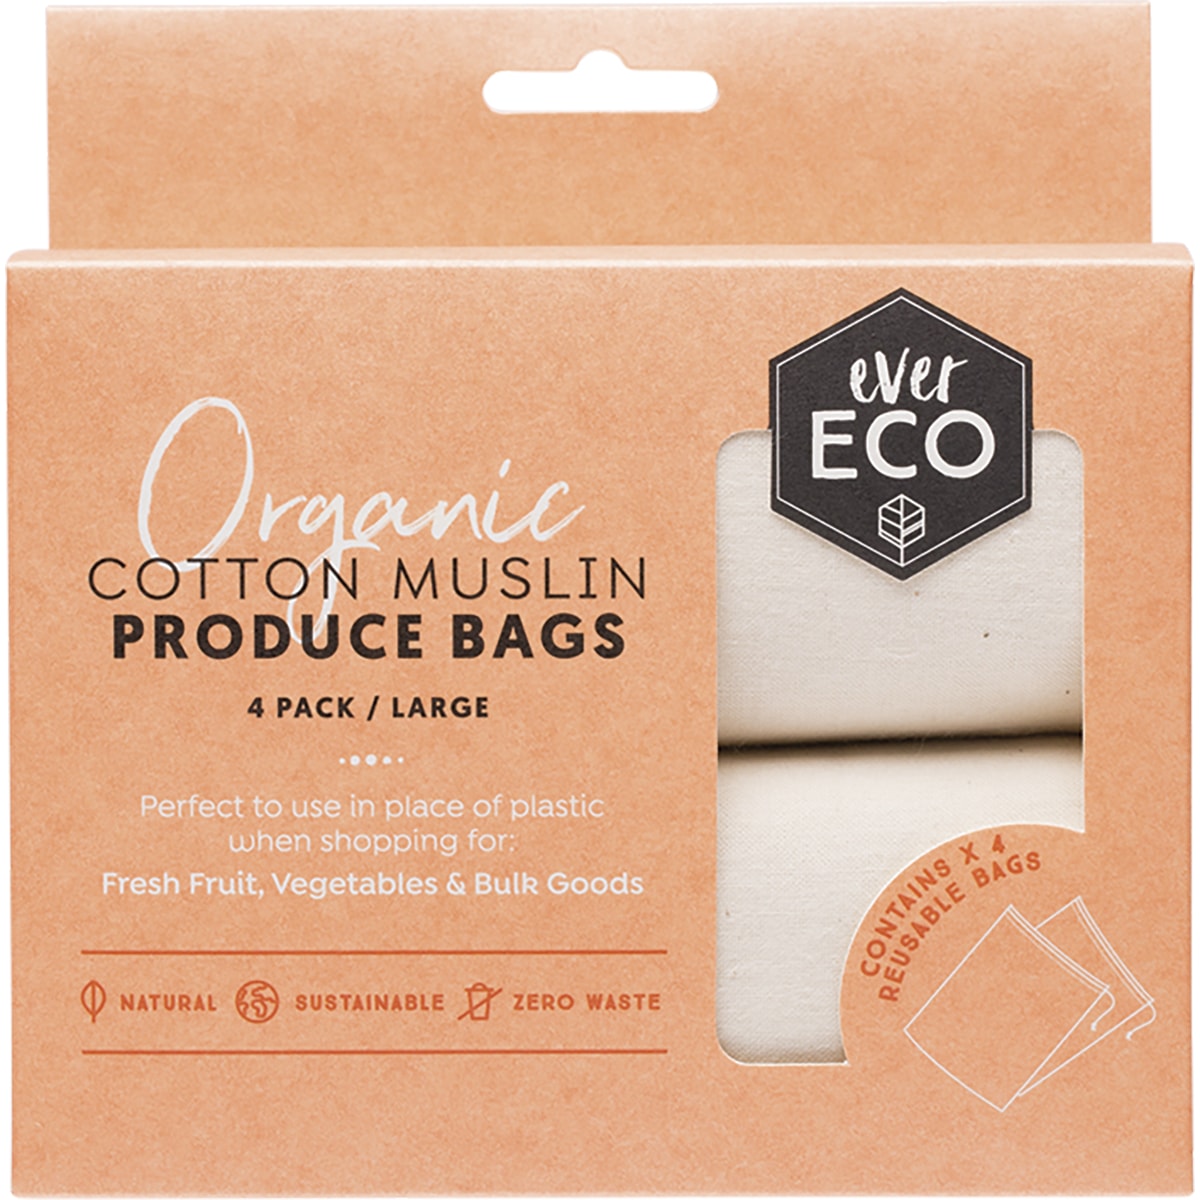 Ever Eco large reusable organic cotton muslin produce bags 4 pack in box